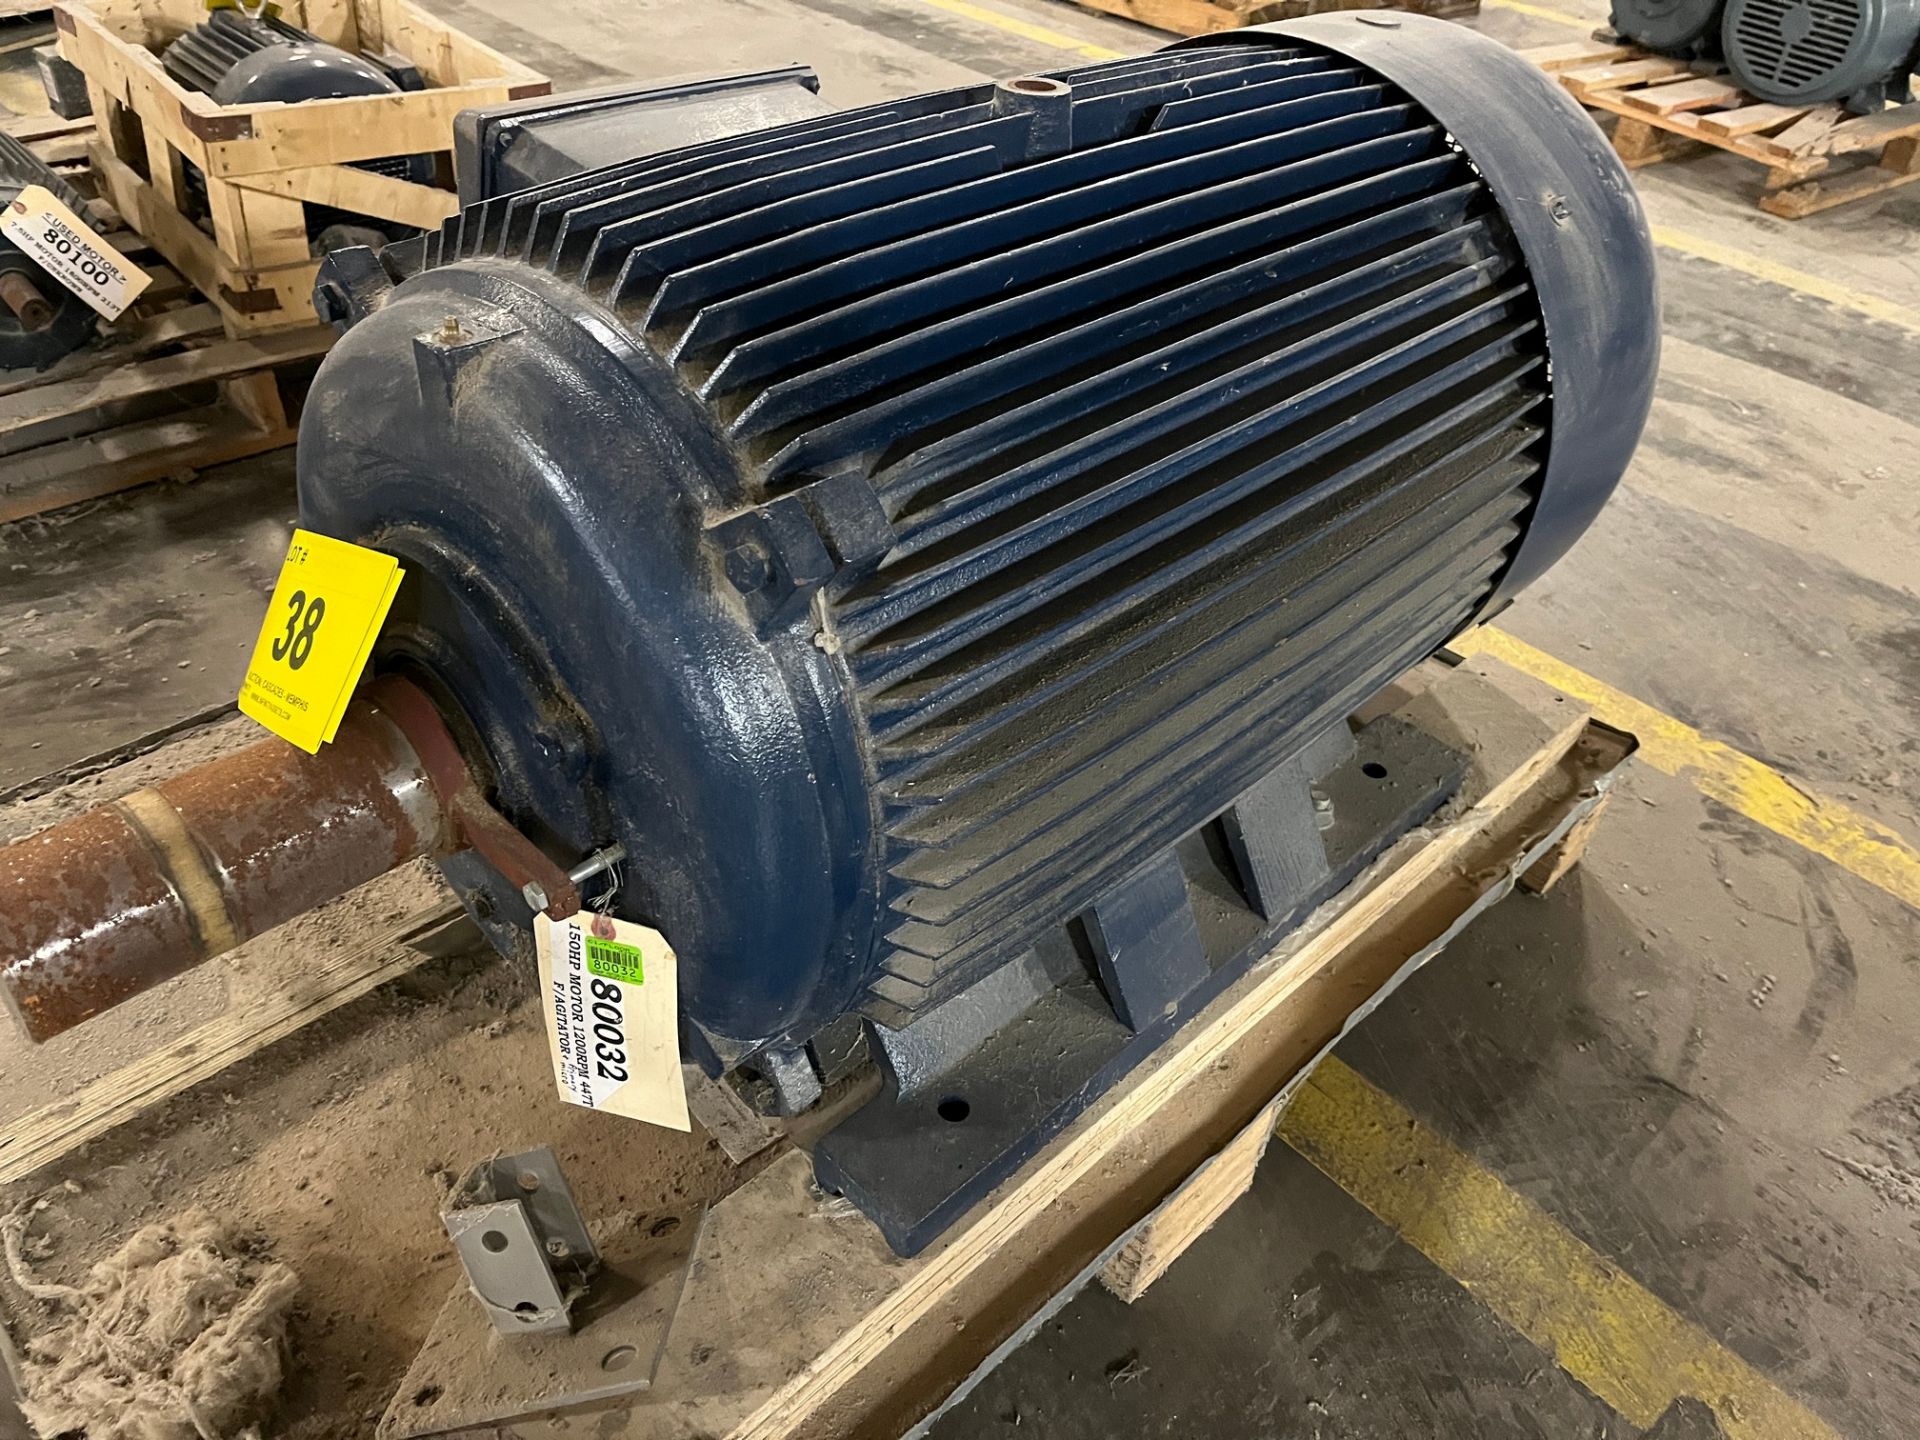 NORTH AMERICAN ELECTRIC AC INDUCTION MOTOR, 150HP, 1,180 RPM, 460V, 447T FRAME (PAPER MACHINE